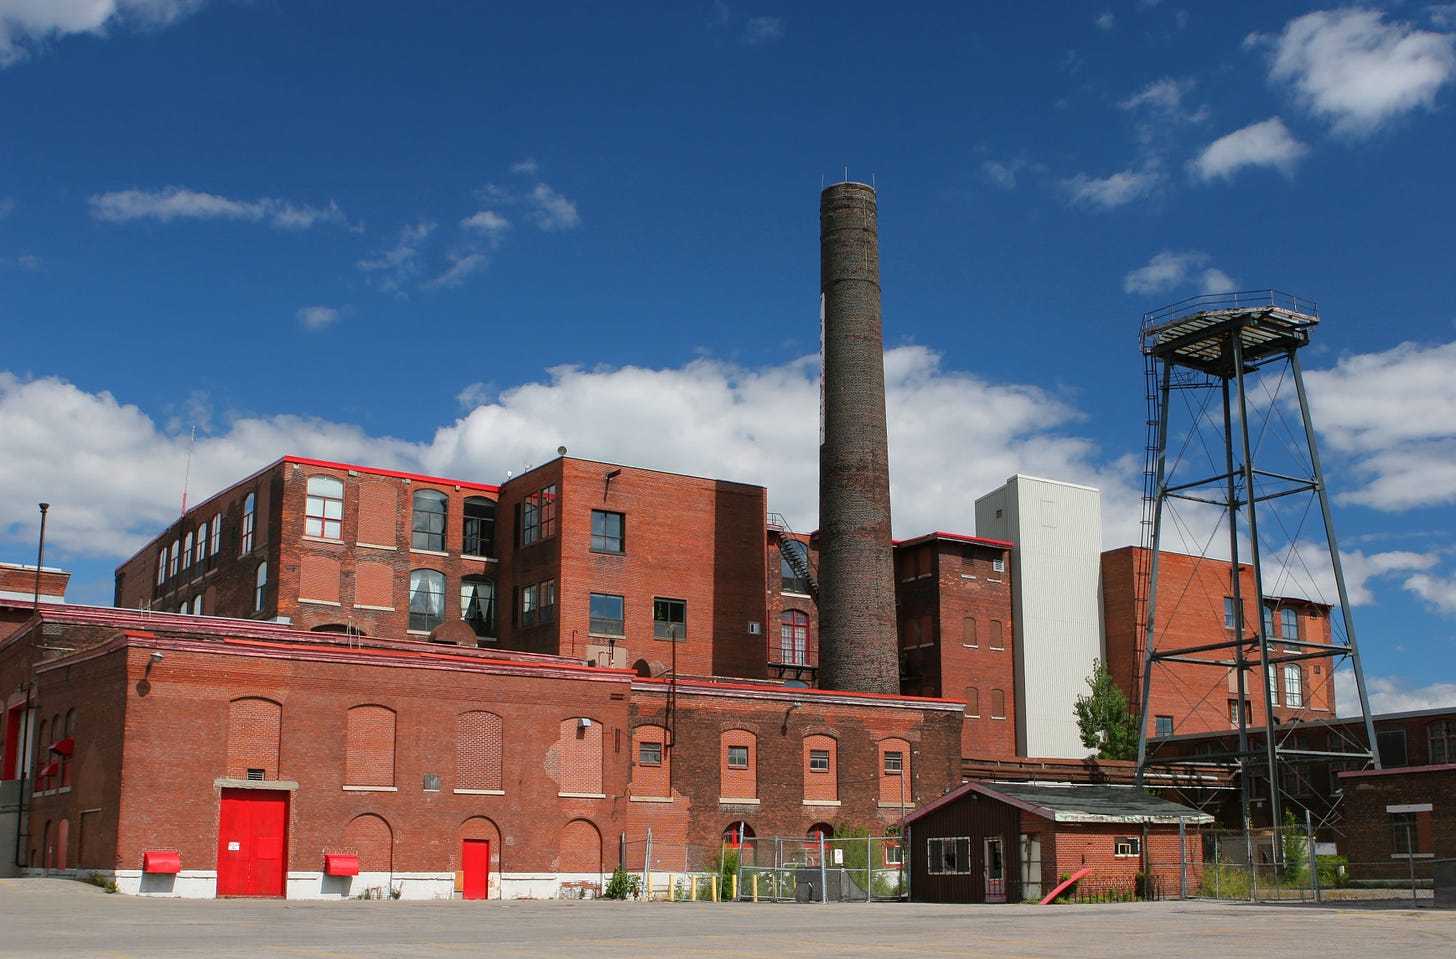 What Is Industrial Architecture?